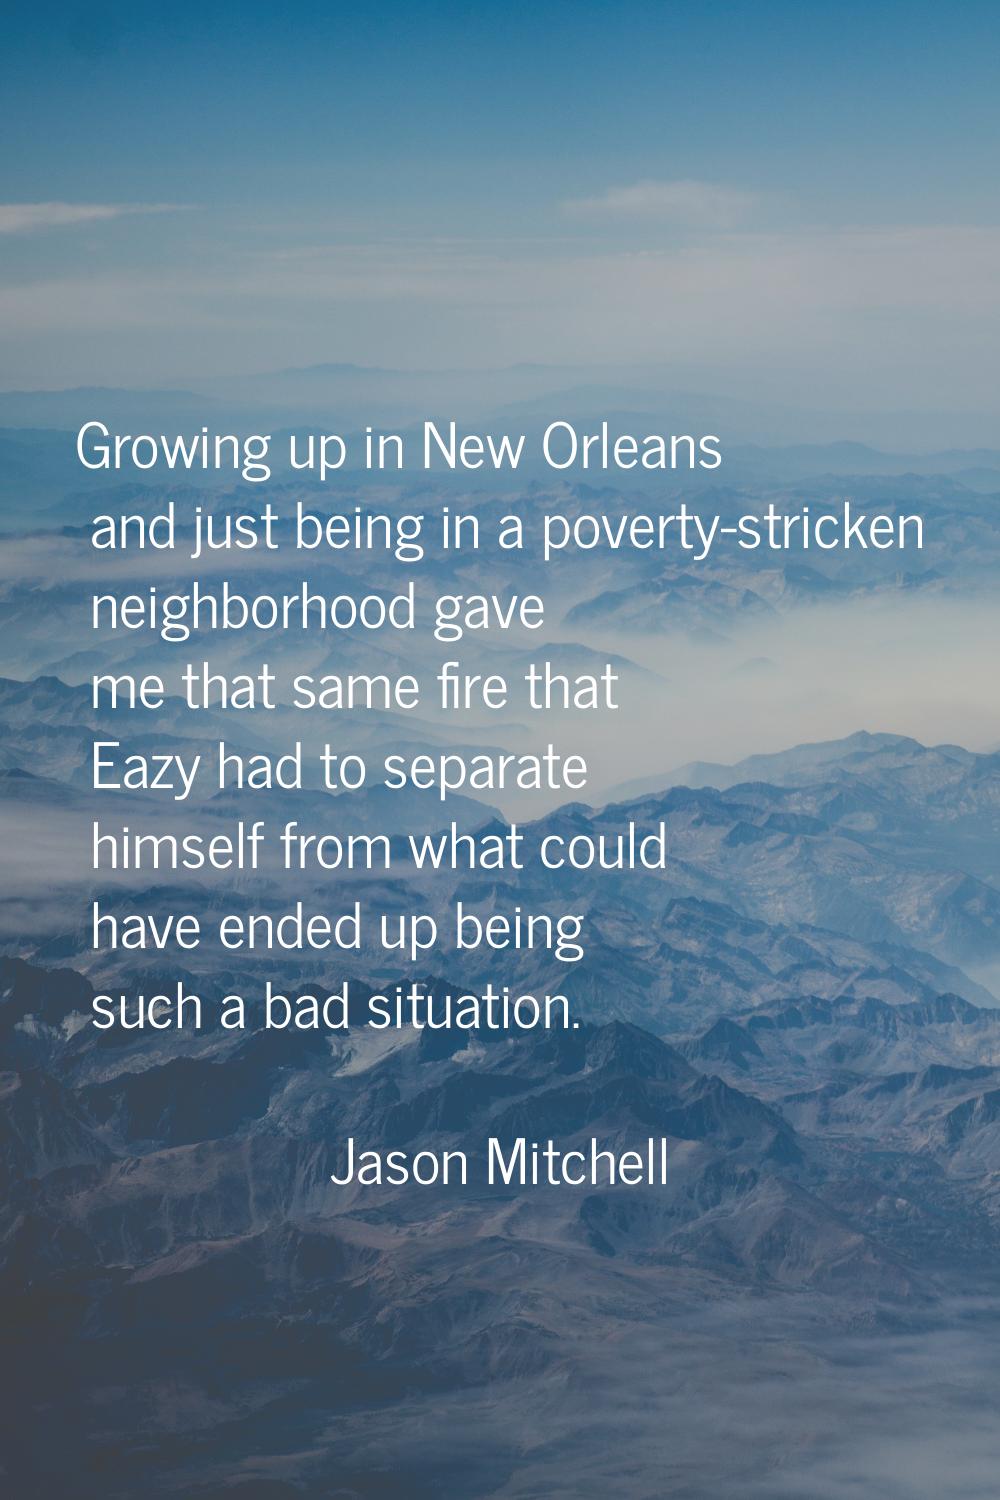 Growing up in New Orleans and just being in a poverty-stricken neighborhood gave me that same fire 